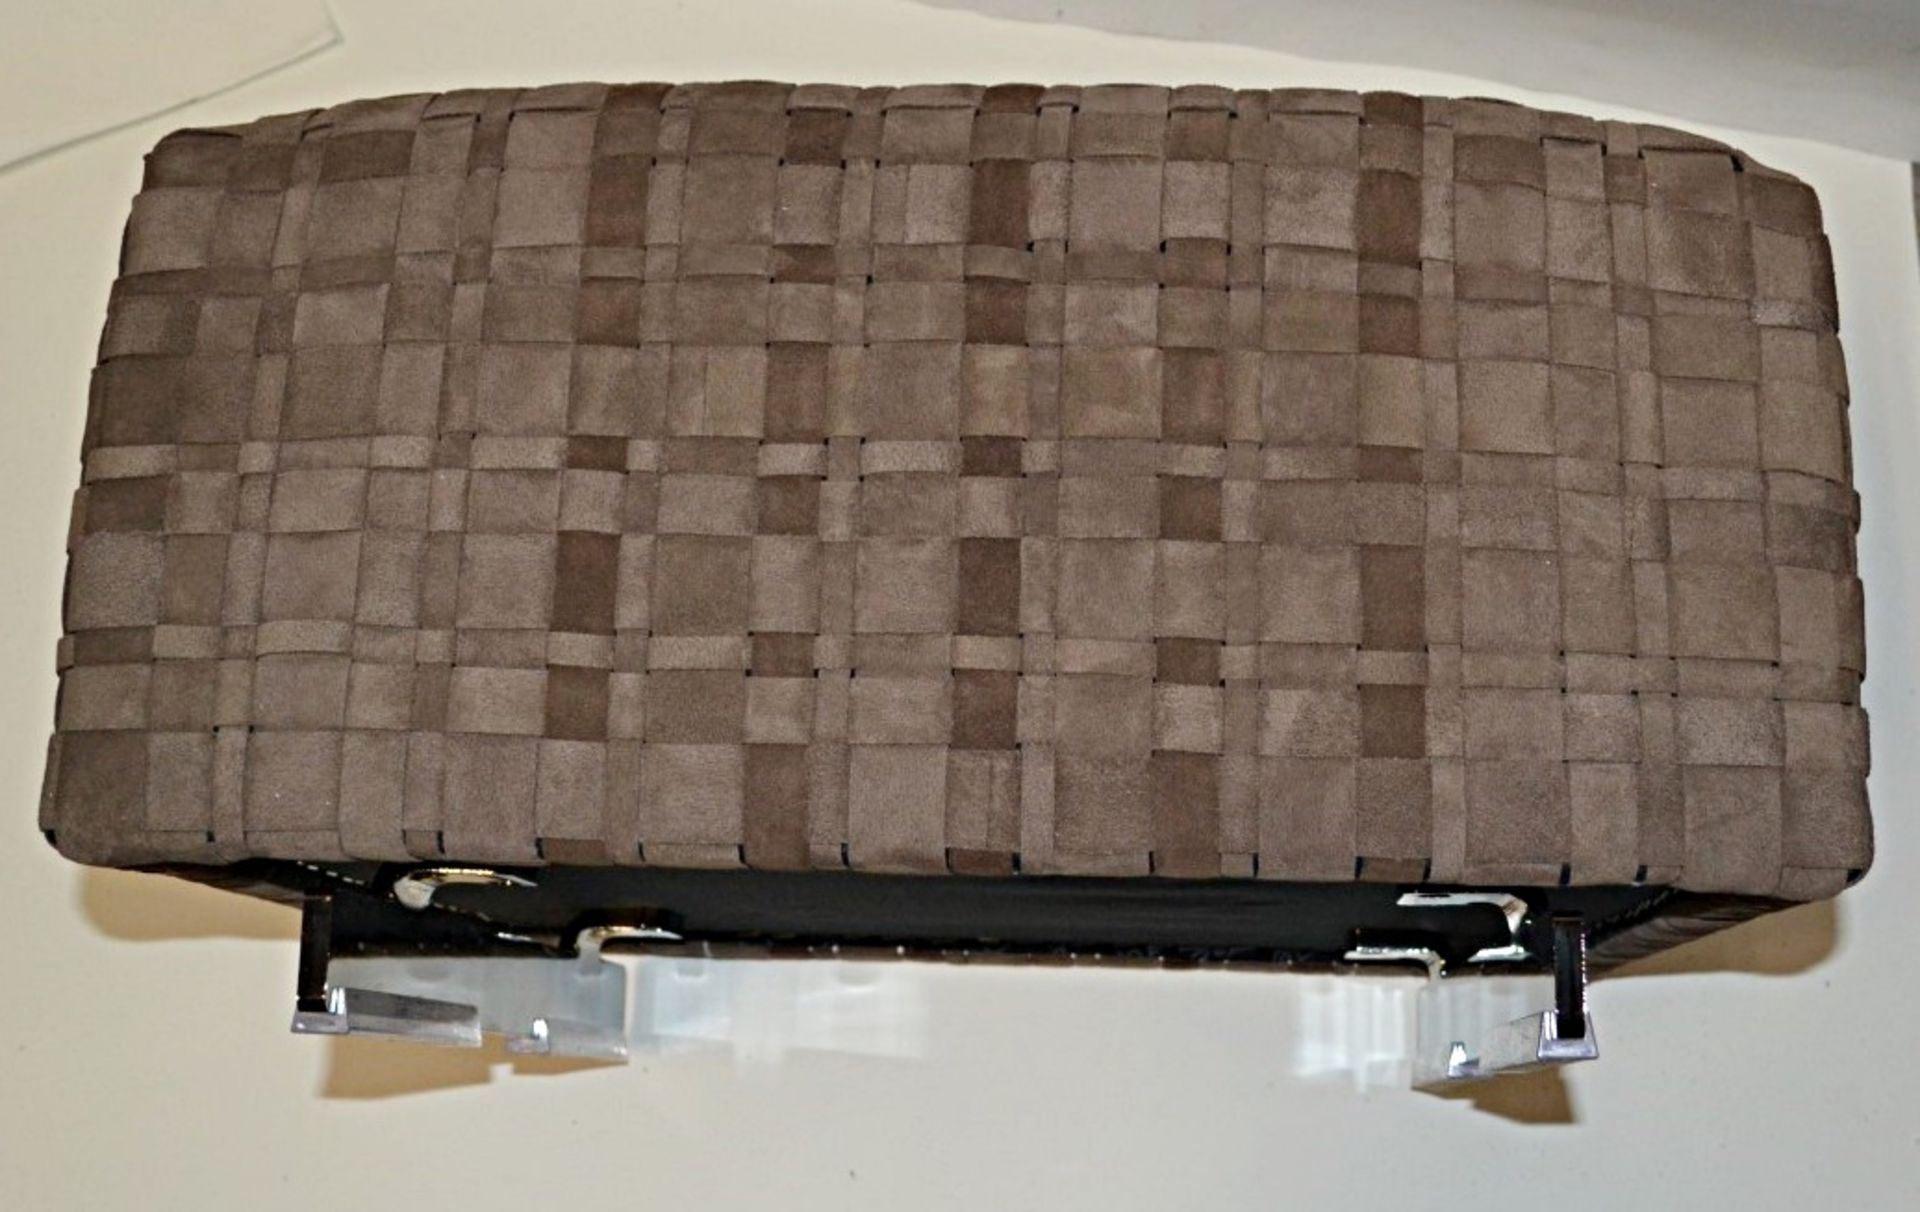 1 x Flexform Bangkok Ottoman - Elegantly Upholstered In Woven Strips of Brown Suede Leather - - Image 8 of 8